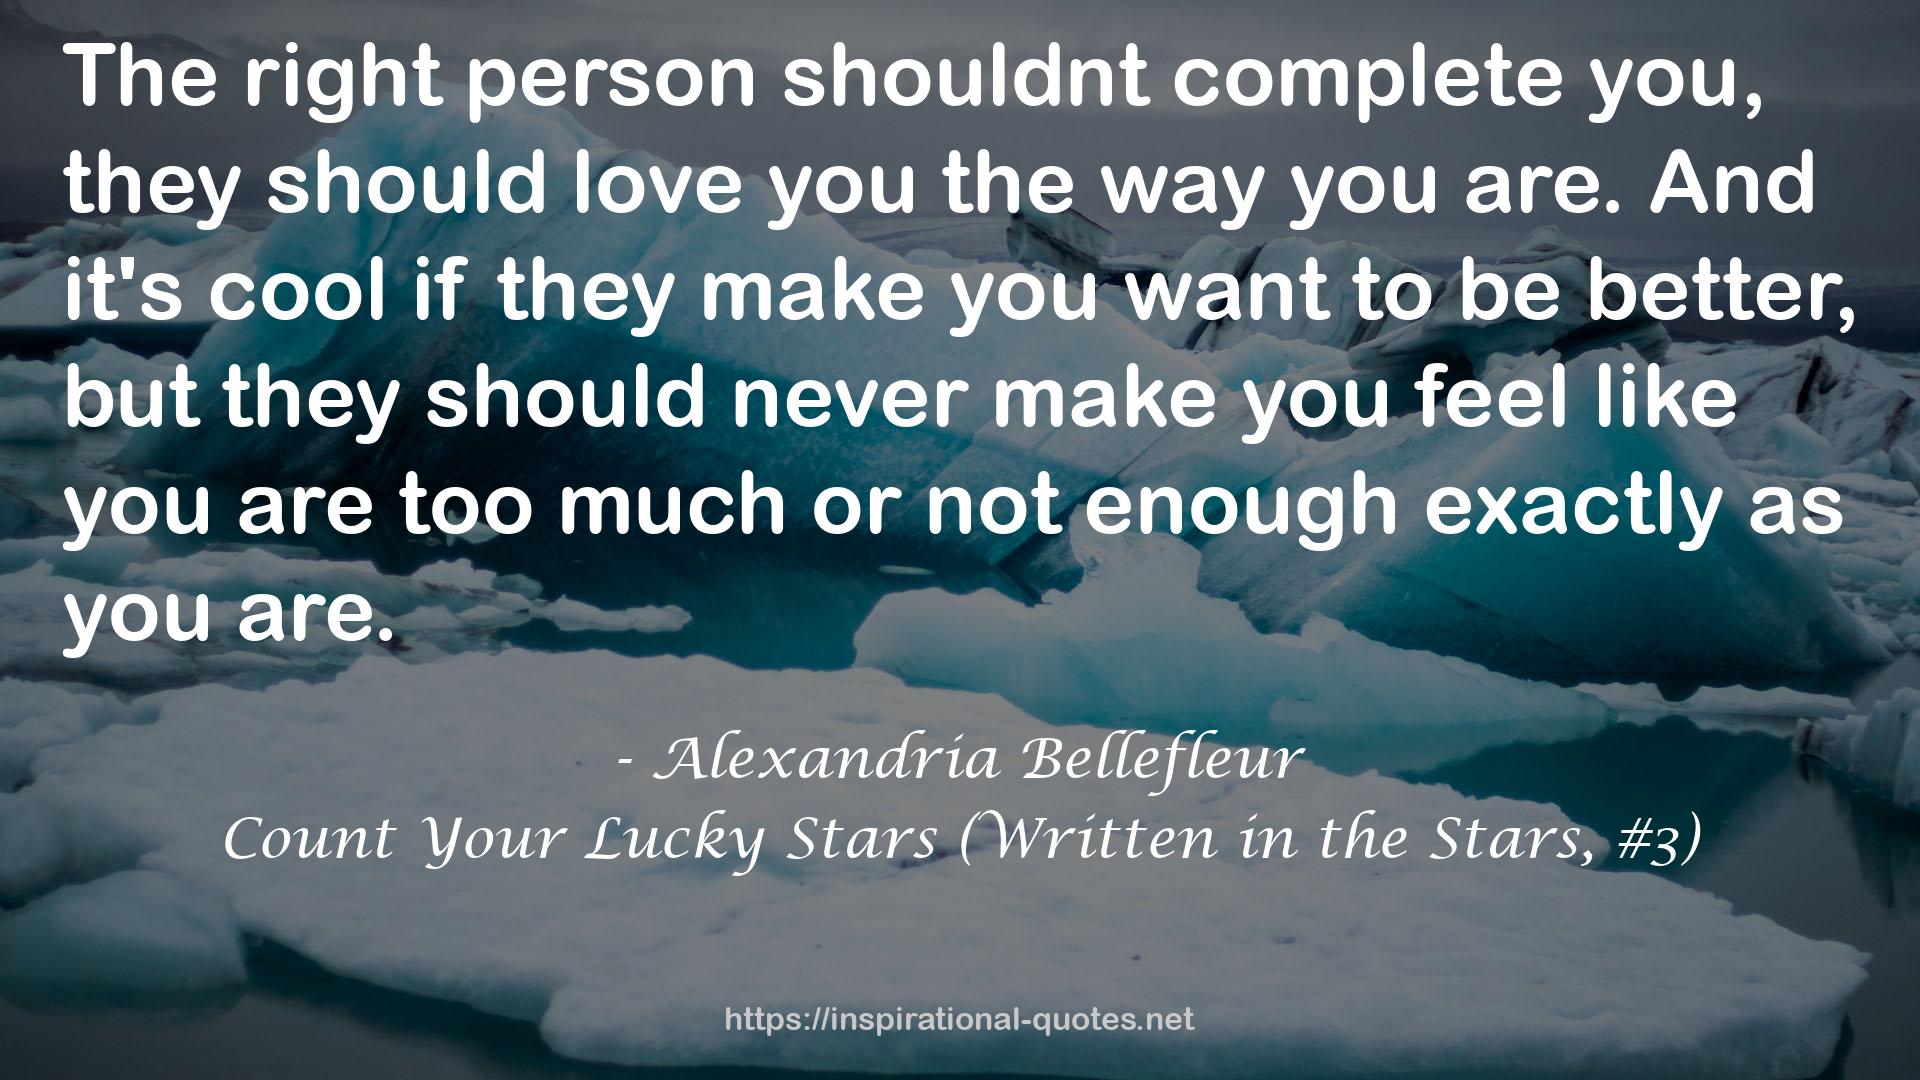 Count Your Lucky Stars (Written in the Stars, #3) QUOTES